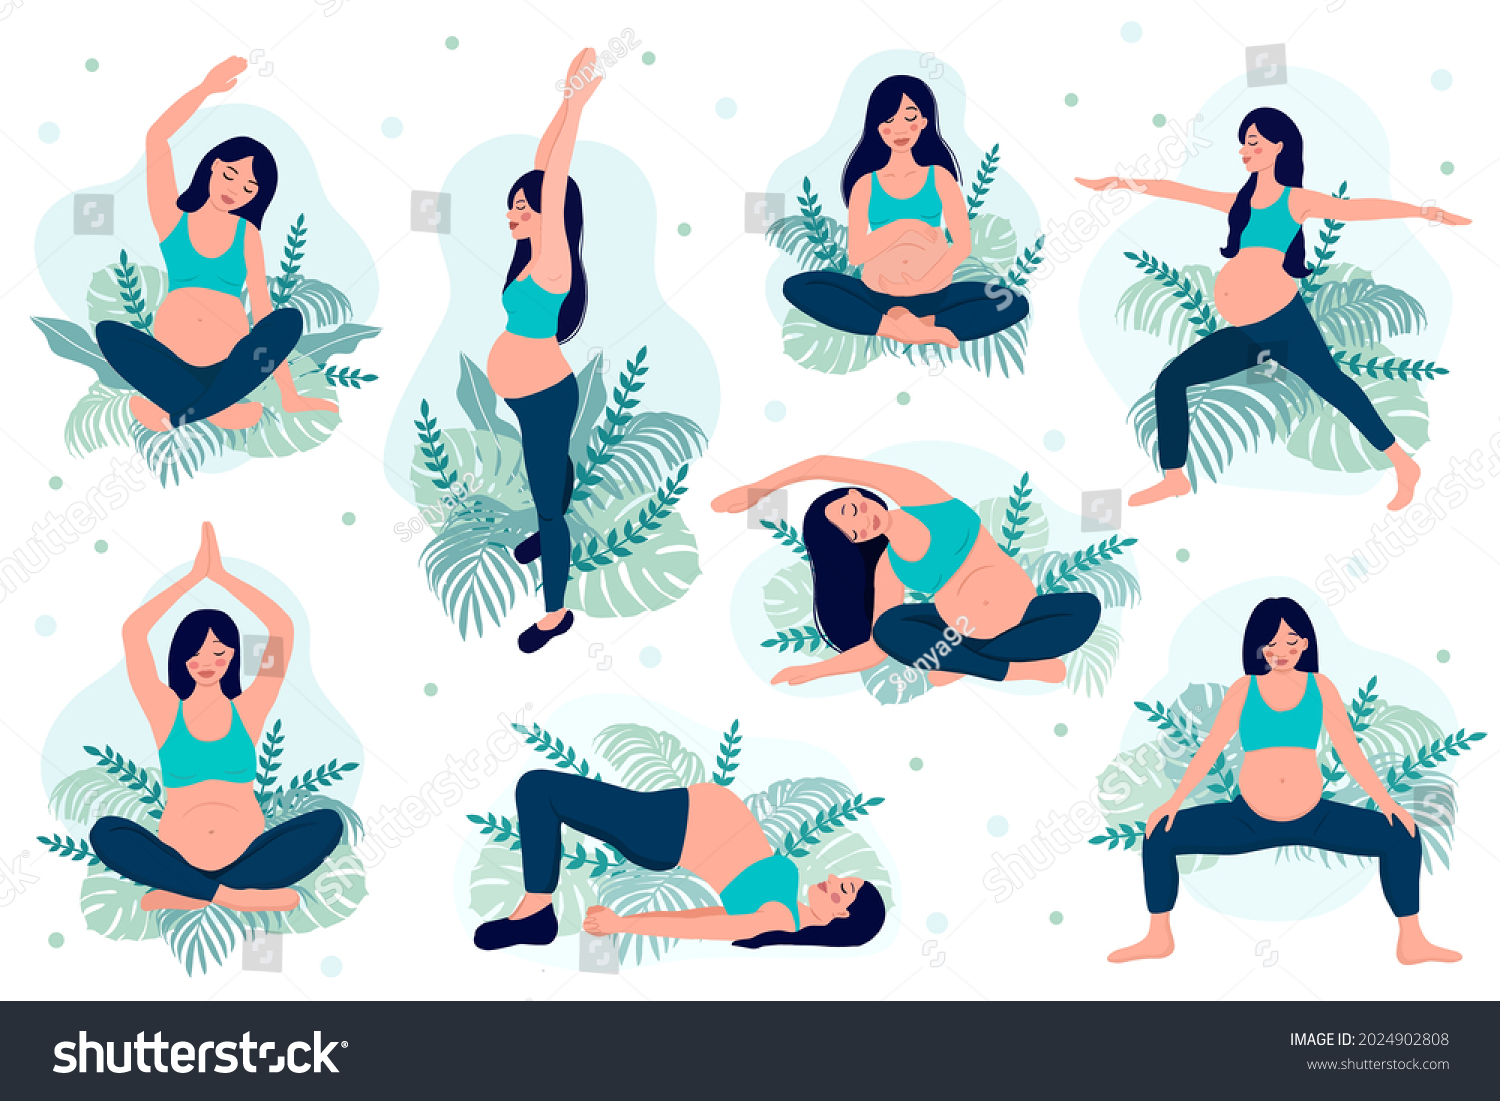 SVG of Happy and healthy pregnancy concept. Pregnant woman doing yoga, 8 exercises for health and relaxation. Illustration vector isolated on white svg